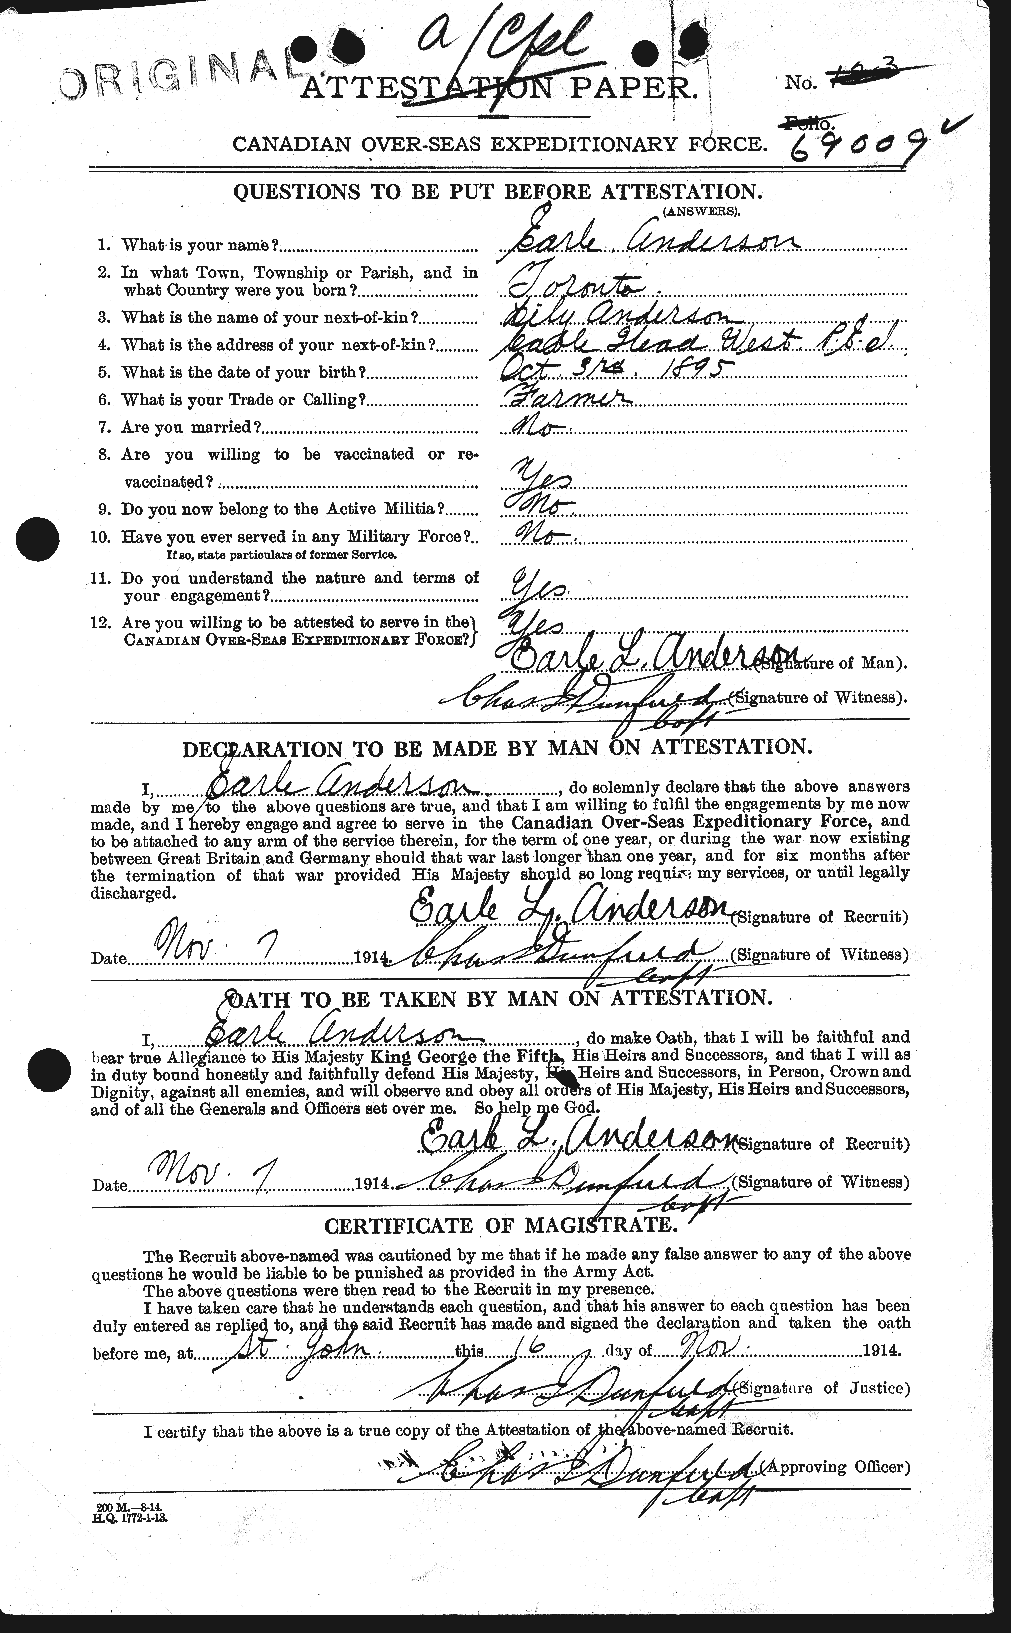 Personnel Records of the First World War - CEF 209964a